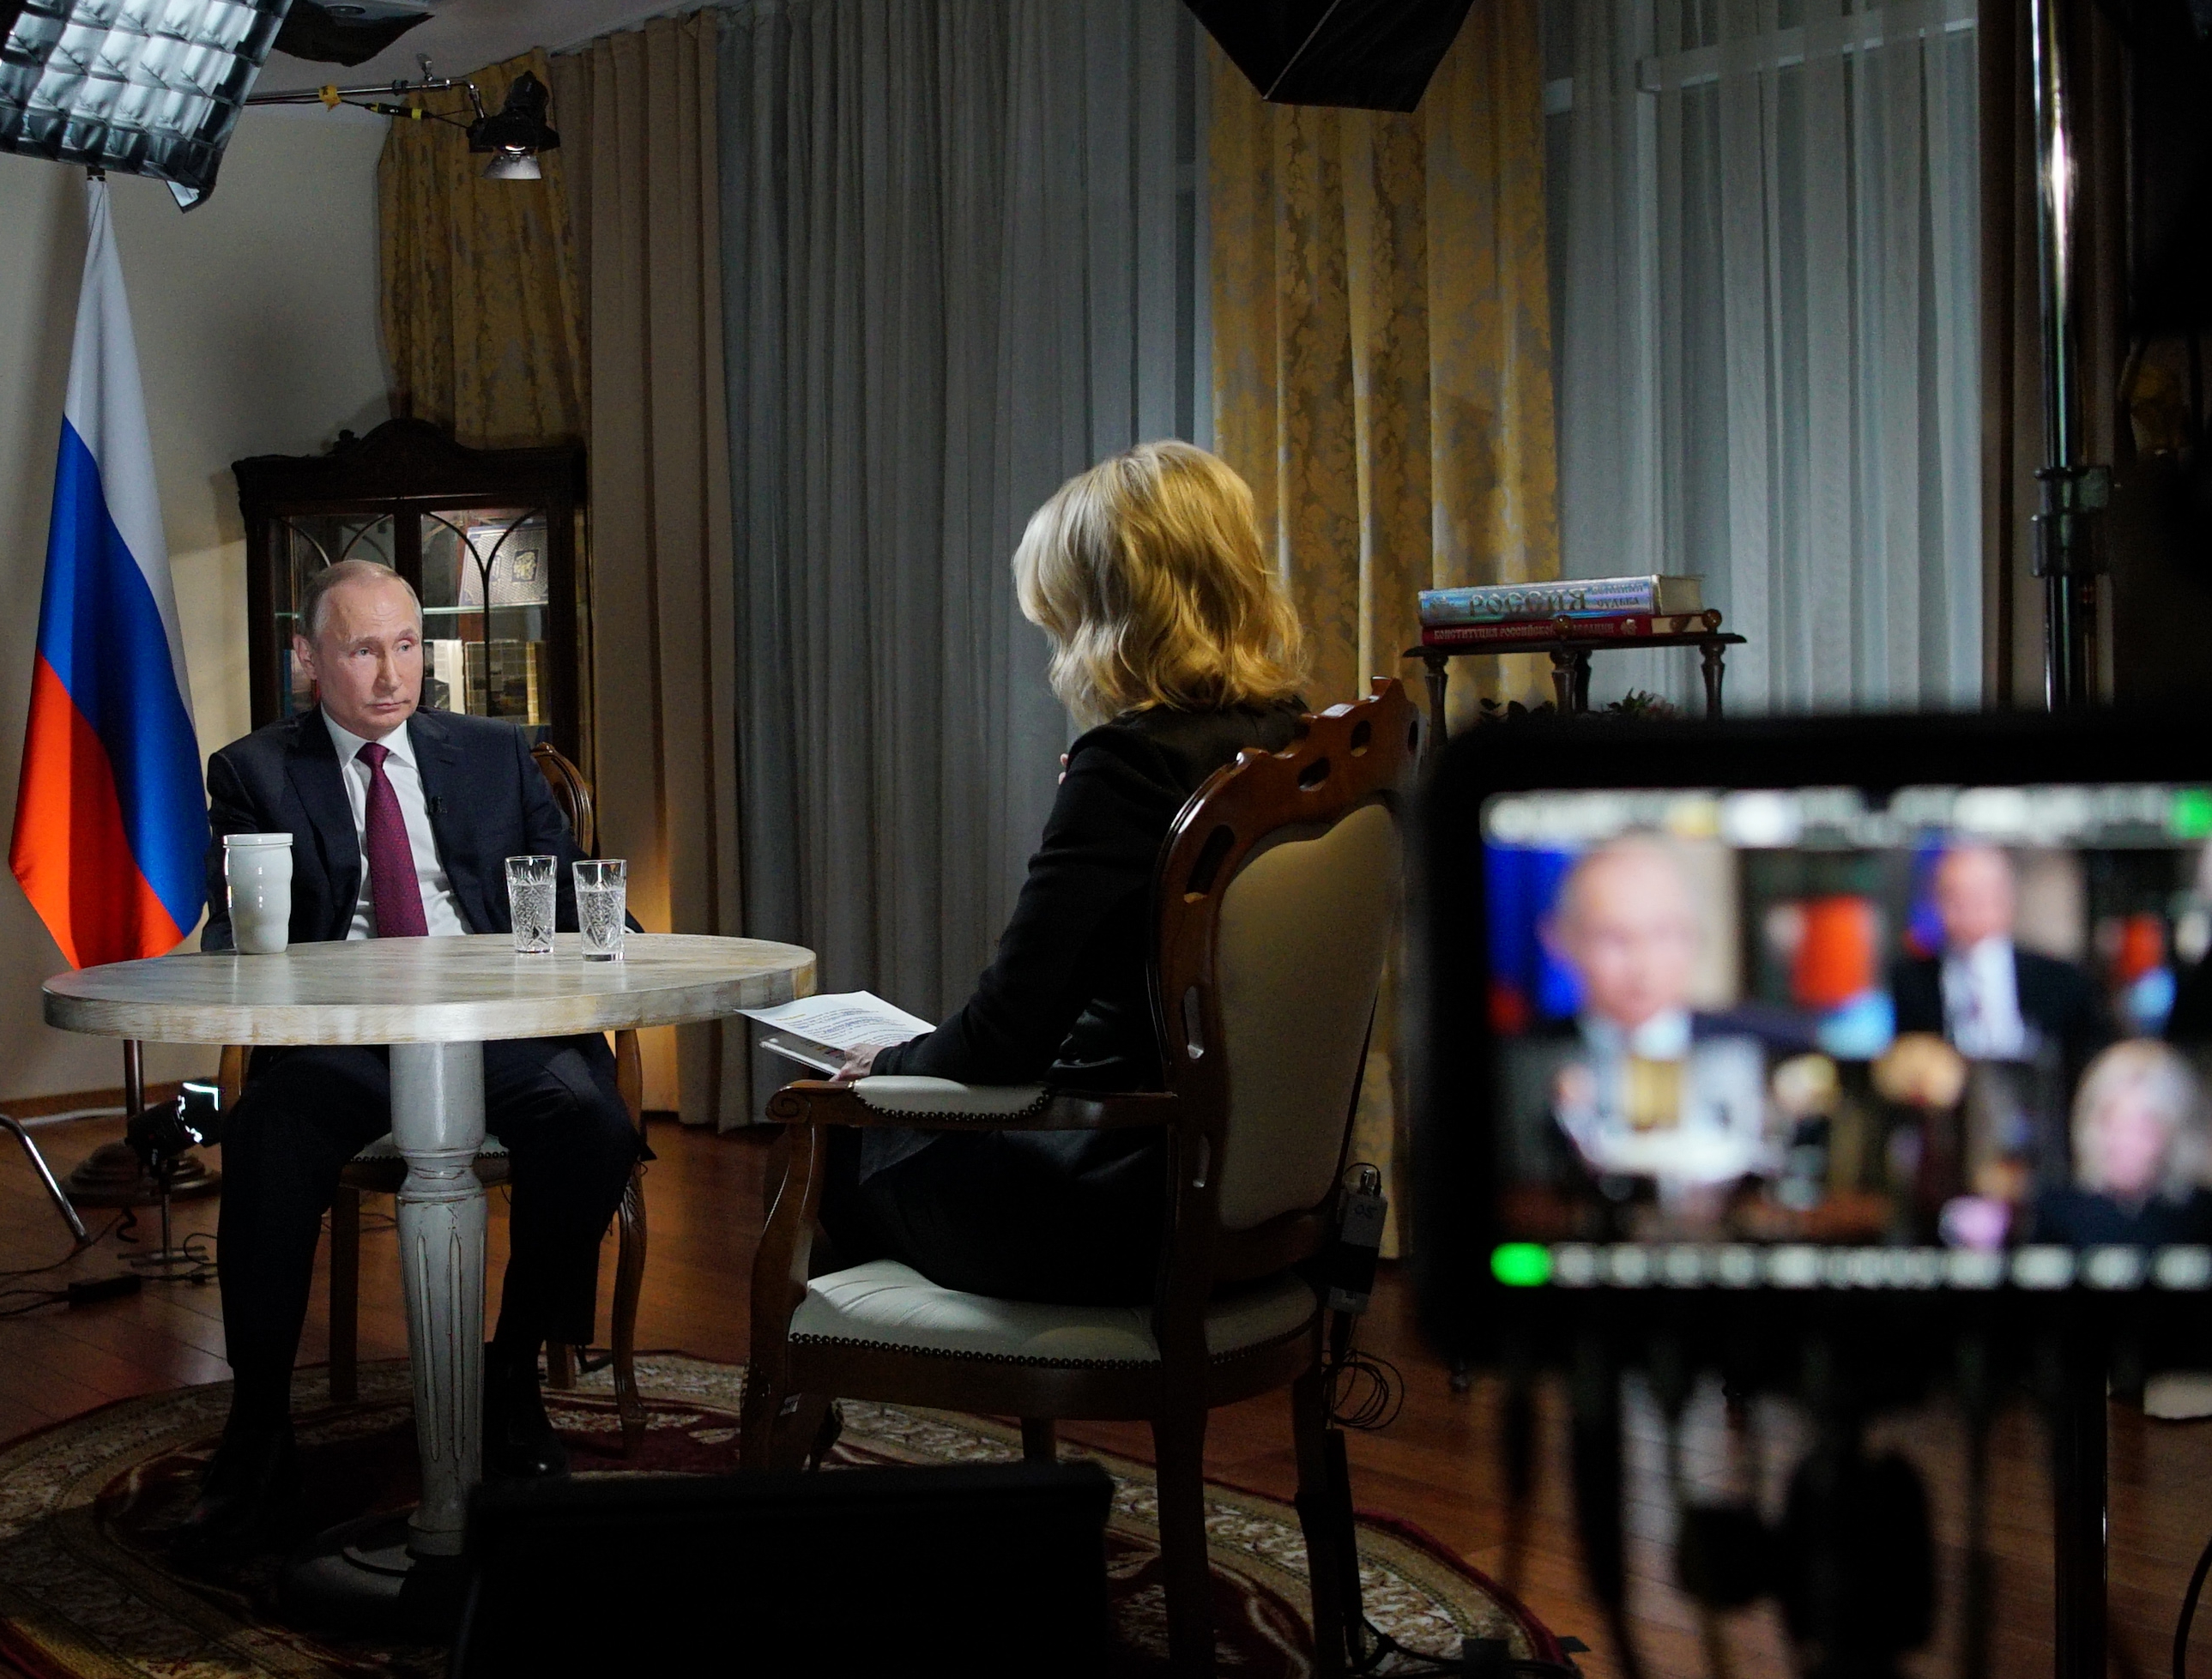 Russia's President Vladimir Putin (L) speaks with US NBC news network anchor Megyn Kelly at the Kremlin on March 1, 2018 in Moscow. (ALEXEI DRUZHININ/AFP/Getty Images)